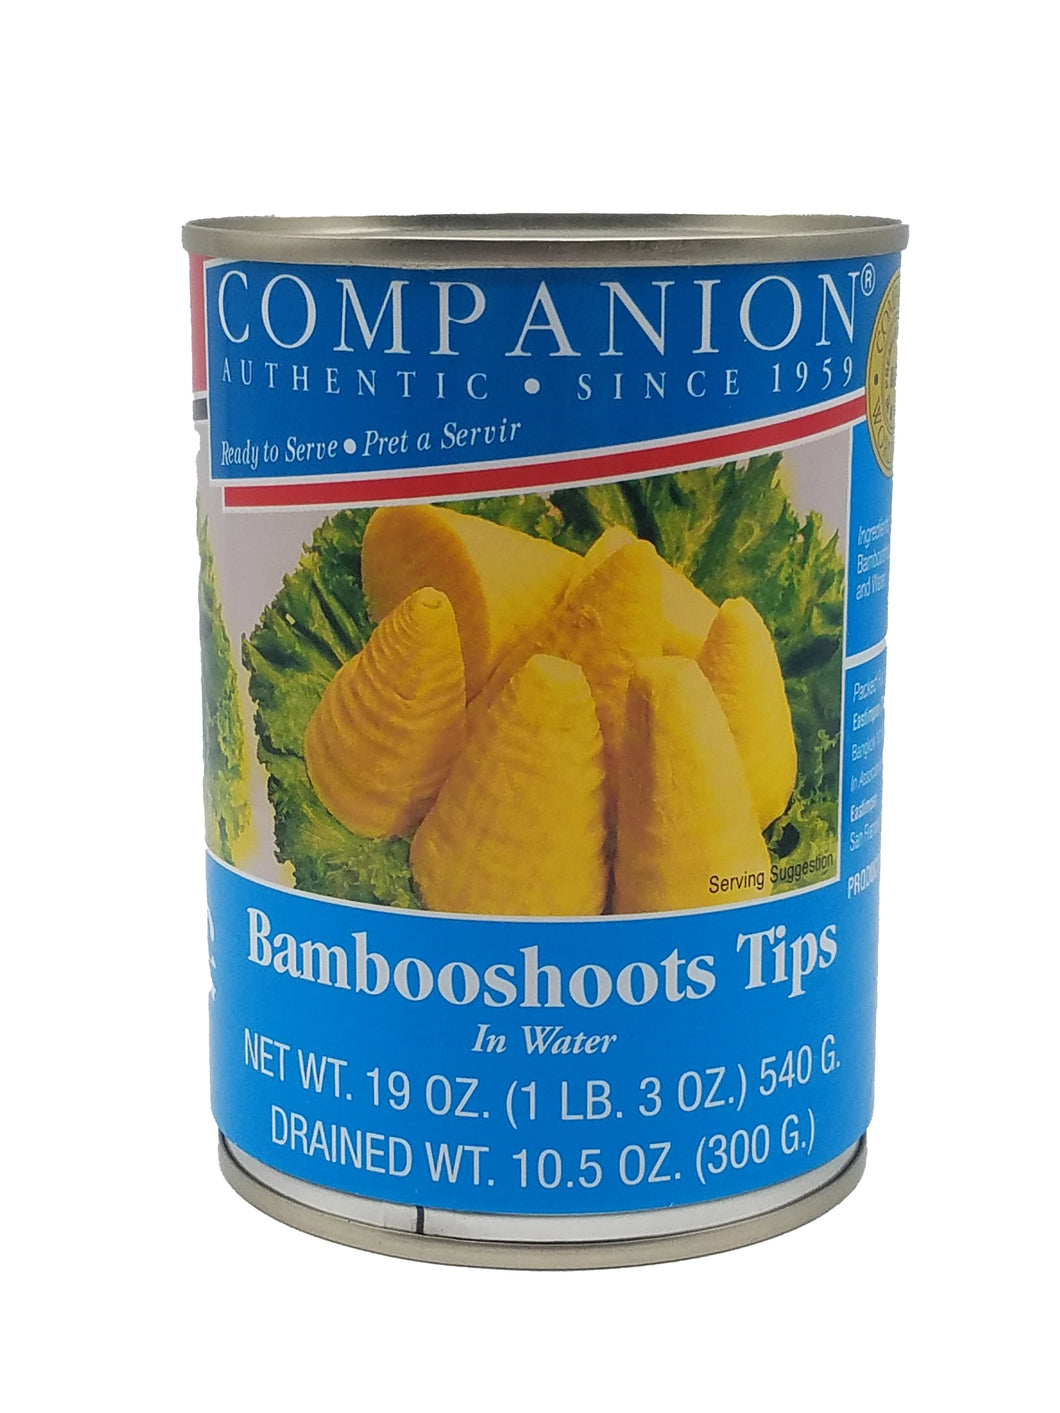 Companion Bamboo Shoots Tips in Water